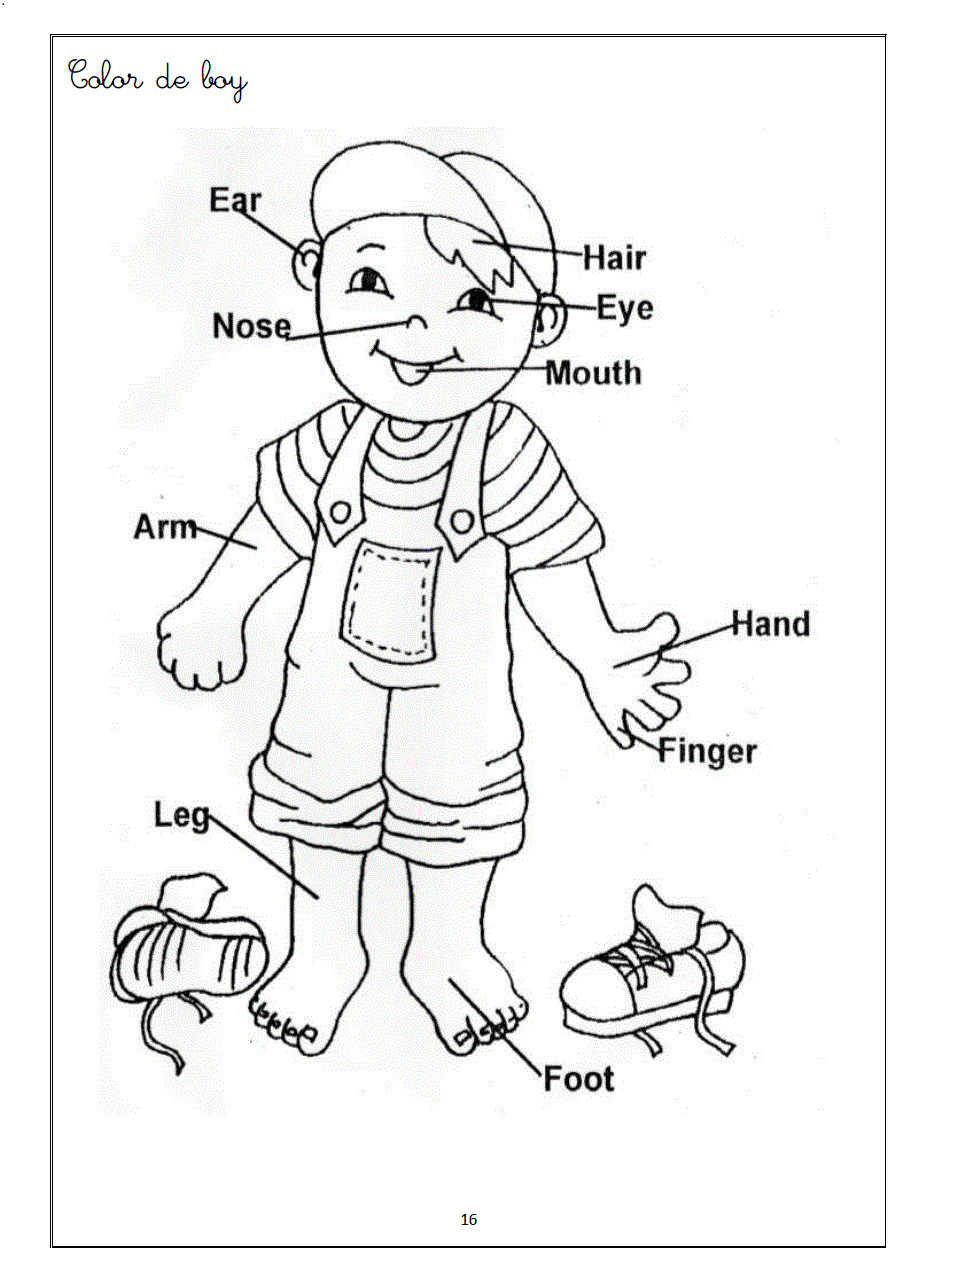 Body Parts Coloring Pages For Toddlers
 Pin on worksheets for kids